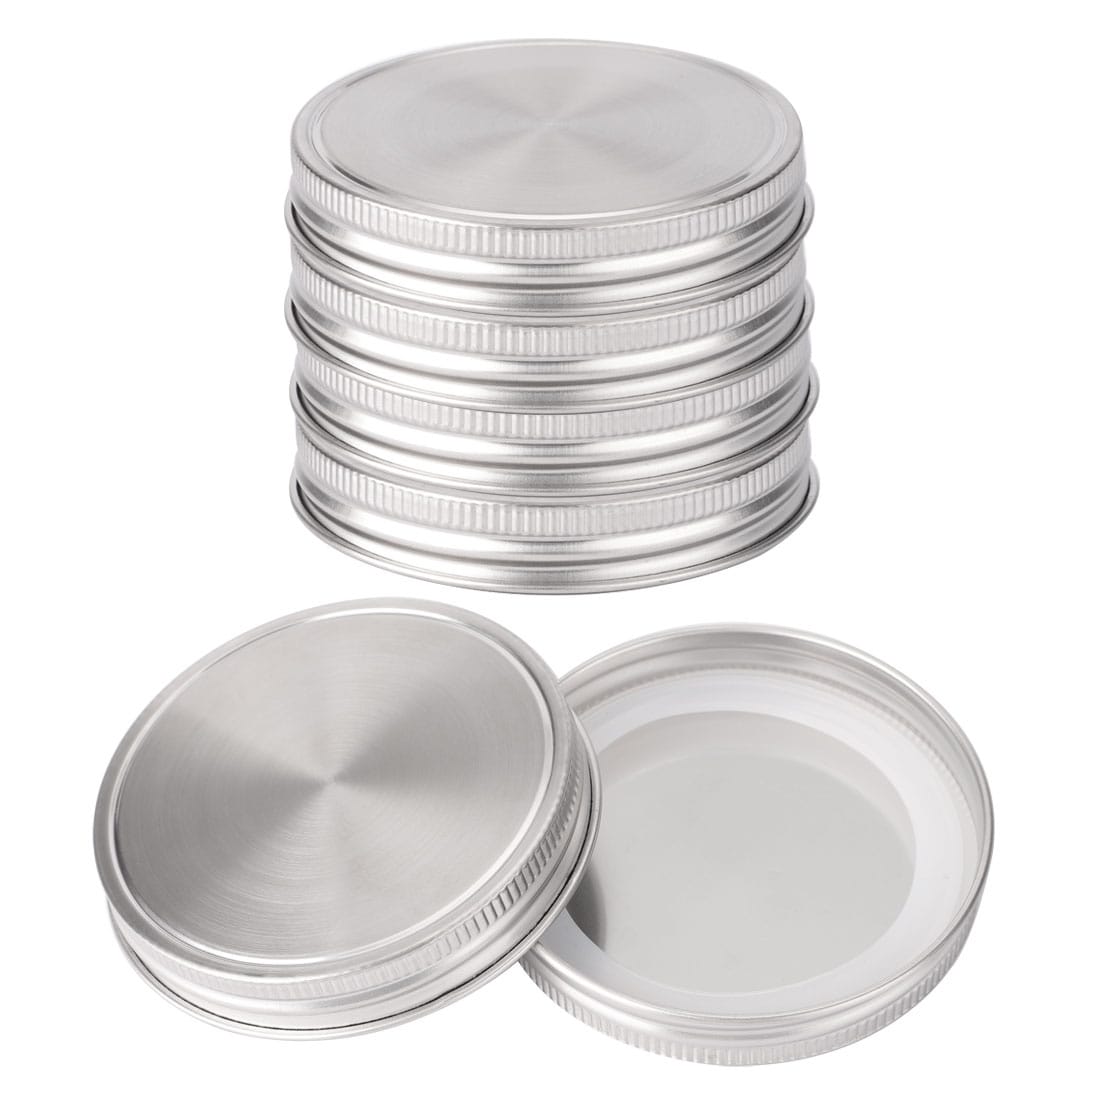 https://ak1.ostkcdn.com/images/products/is/images/direct/54e72adbba01f76dd846e00afa3296f7e218c6dd/6pcs-Stainless-Steel-Wide-Mouth-Mason-Jar-Lids-with-Sealing-Rings-Food-Storage-Caps-for-Mason-Canning-Ball-Jars.jpg